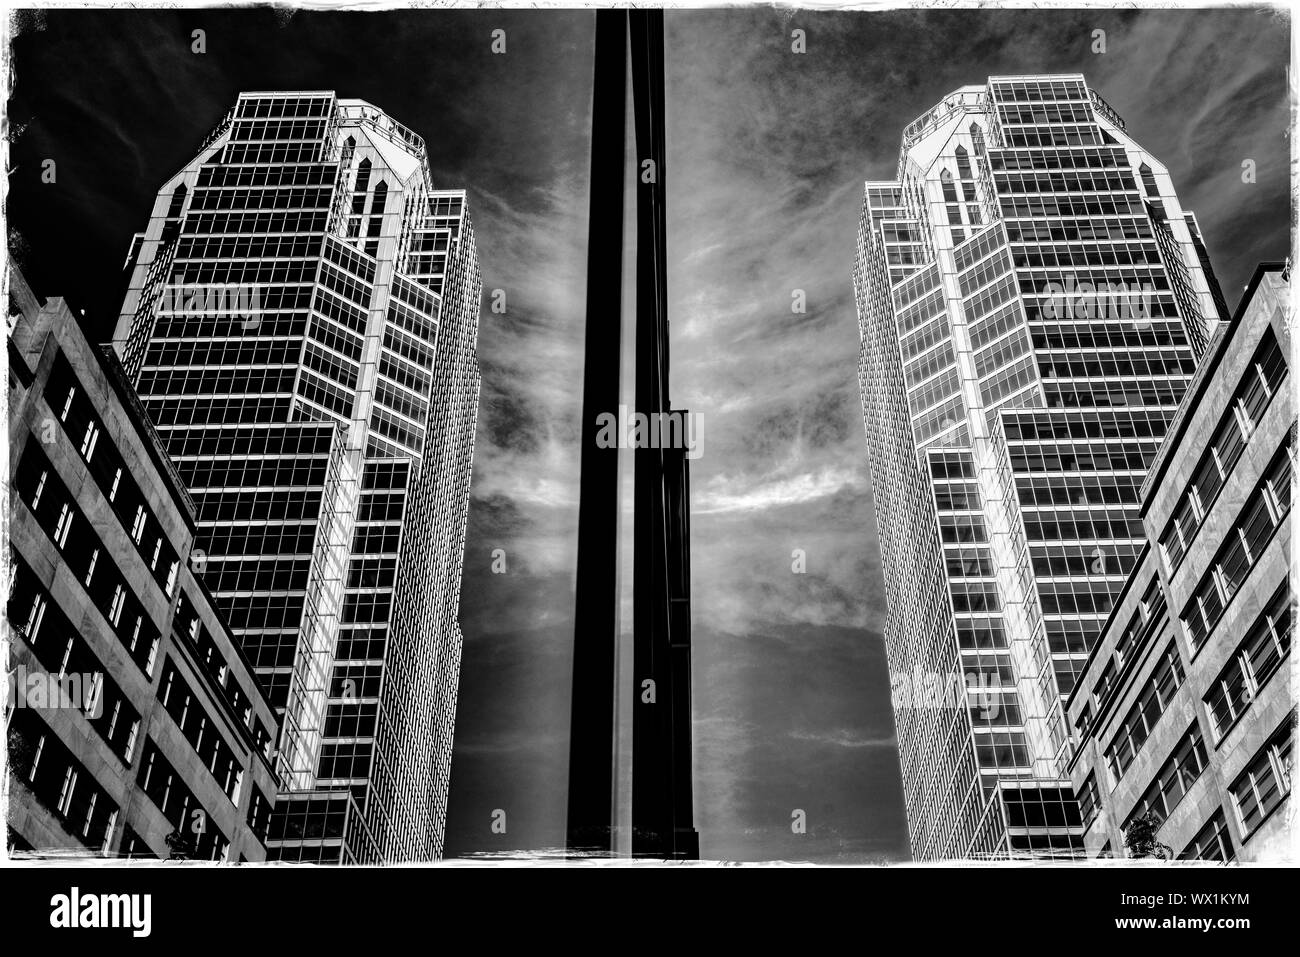 The KPMG Building reflected in the glass walls of the BNP Paribas Building, boulevard Maisonneuve, Montreal Stock Photo